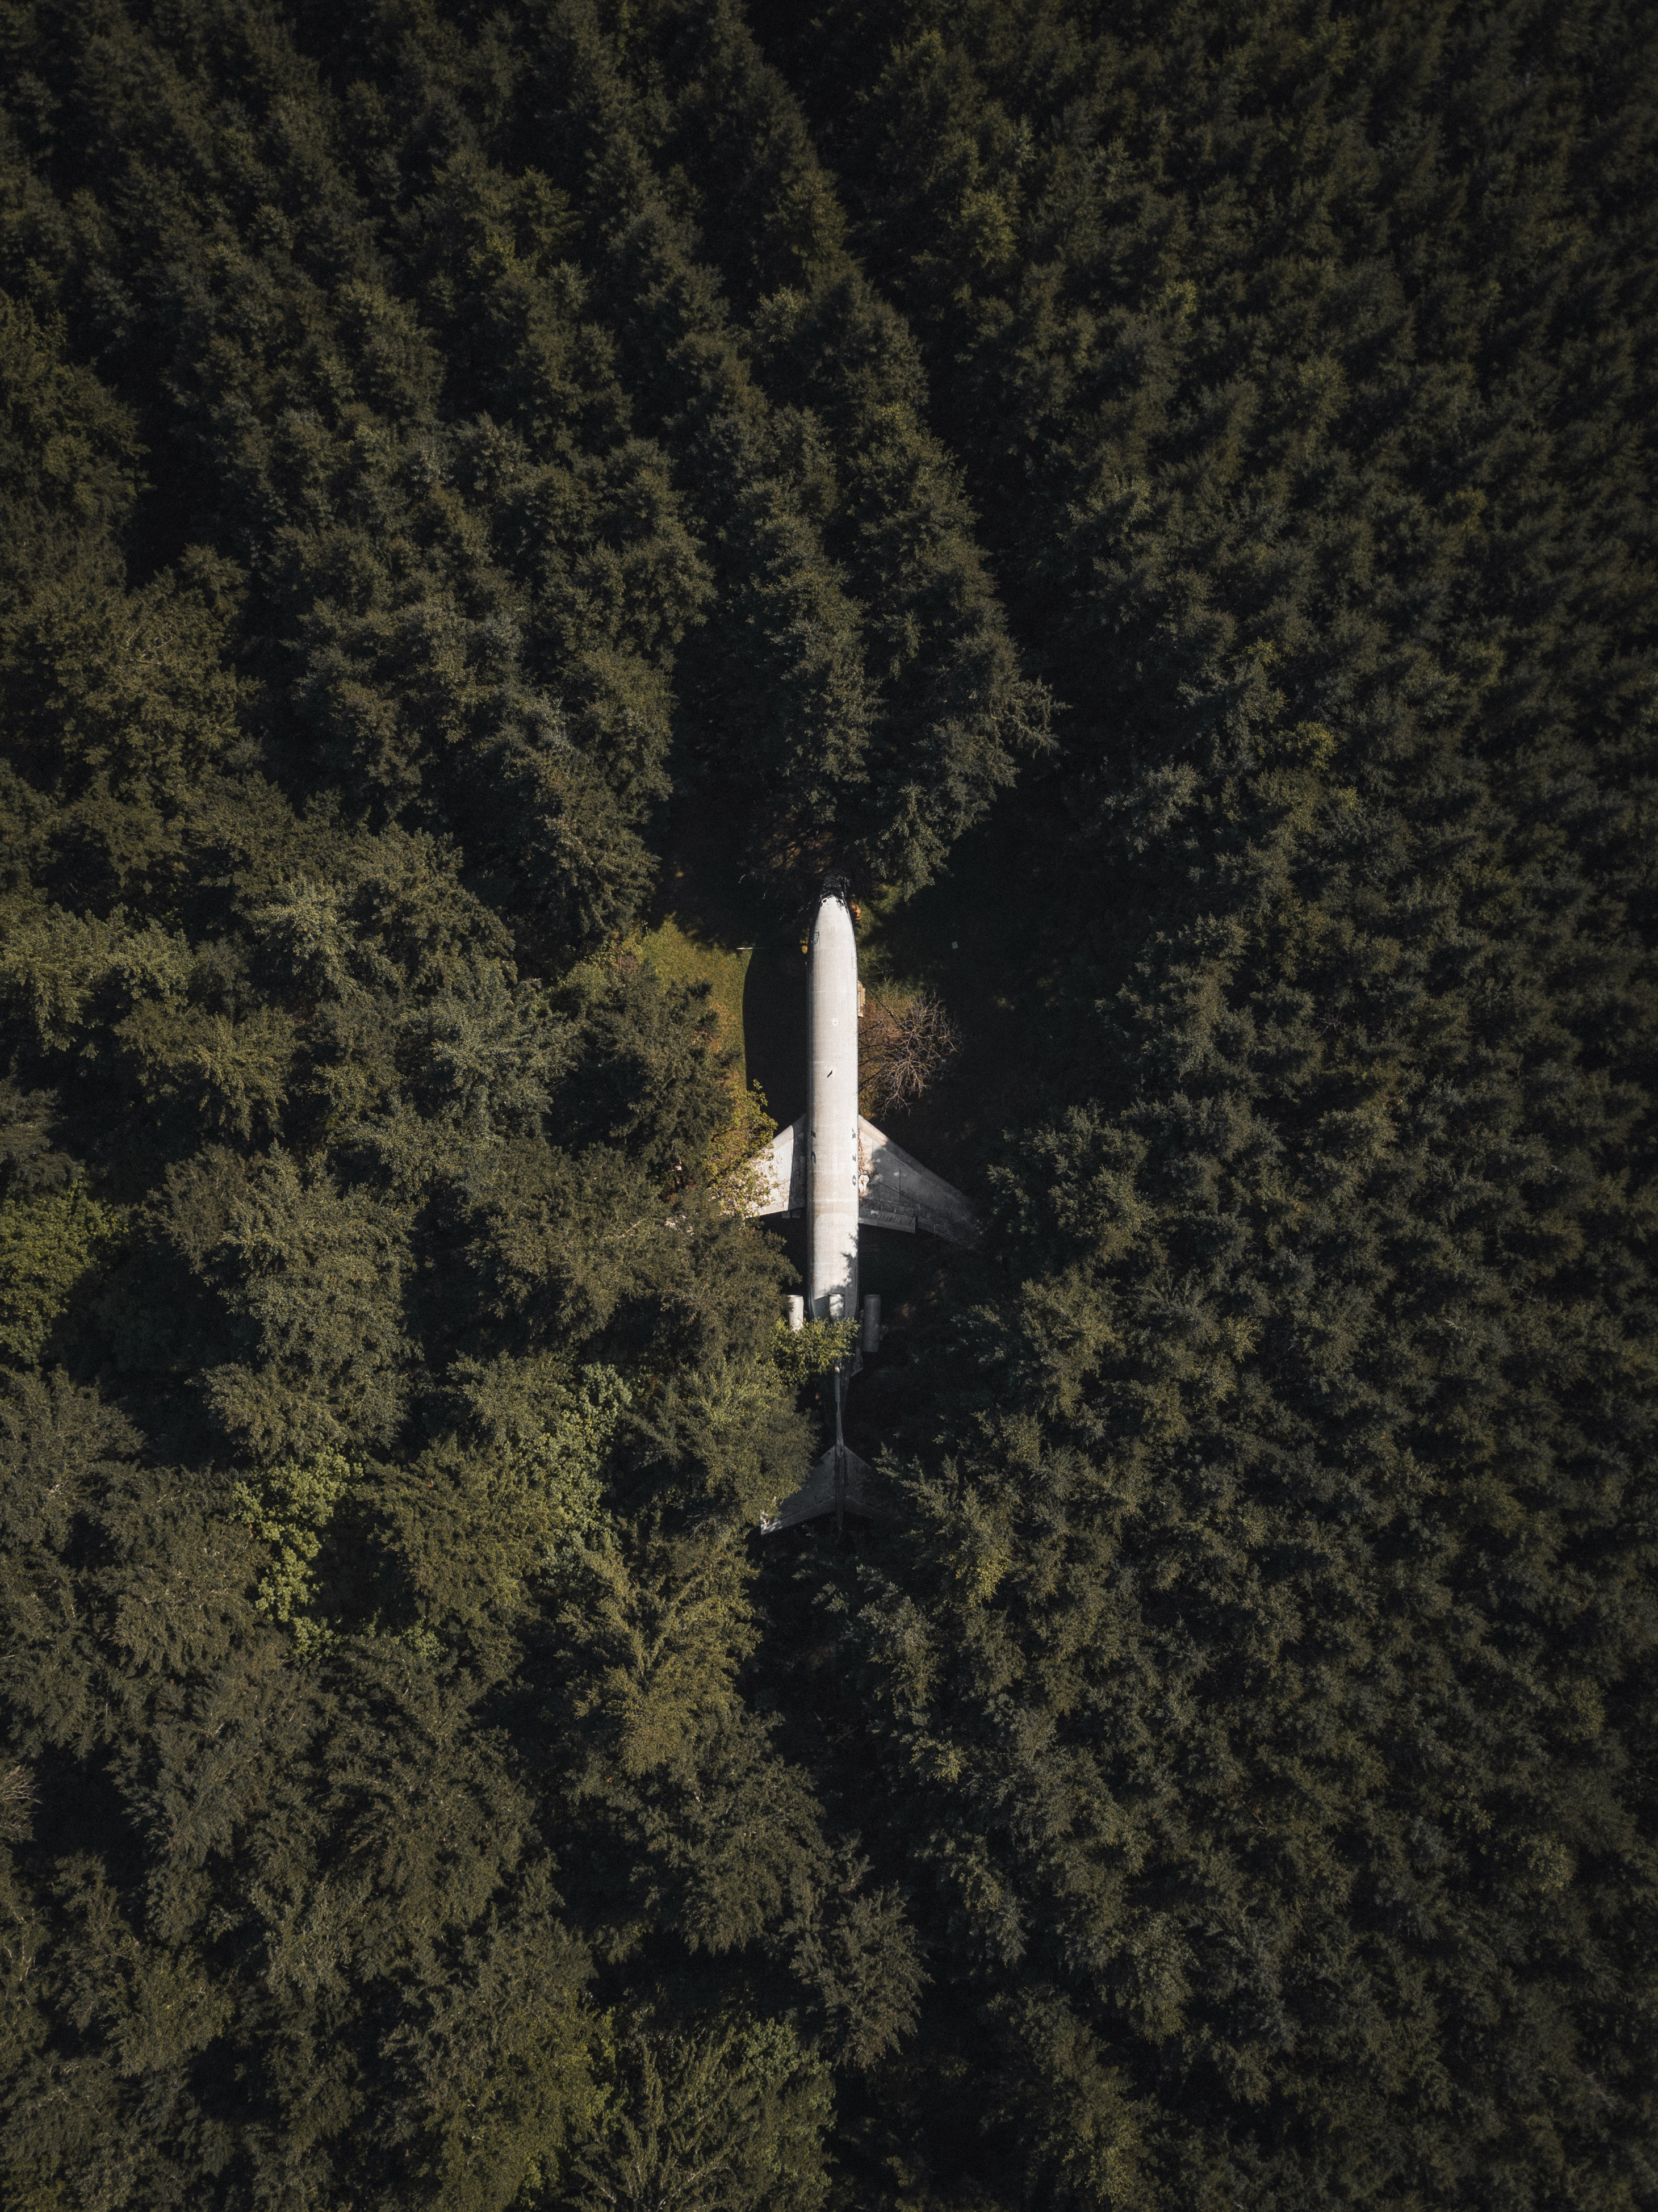 top, trees, view from above, miscellanea, miscellaneous, forest, tops, plane, airplane